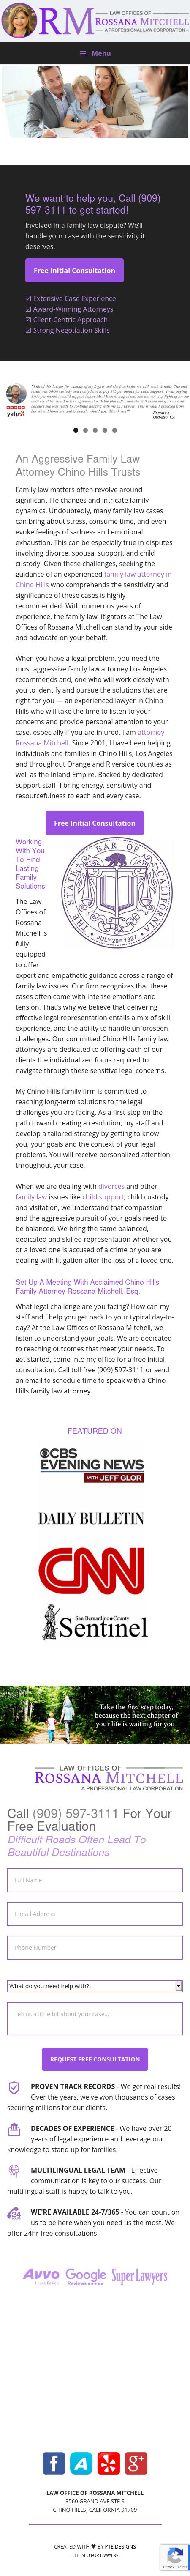 Law Offices of Rossana Mitchell - Chino Hills CA Lawyers